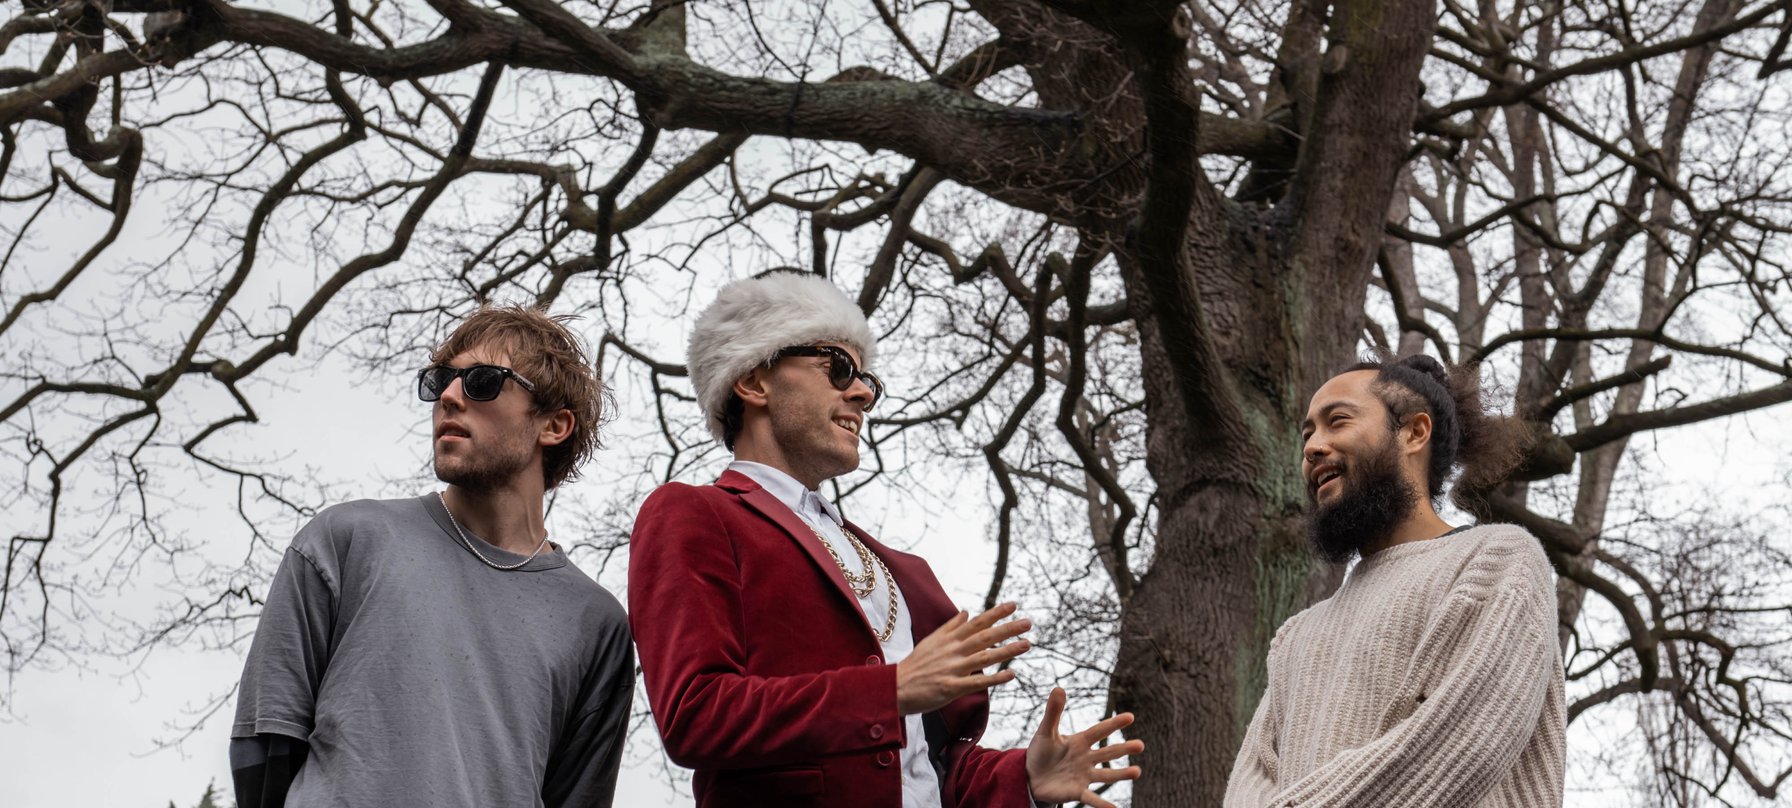 A photo of the 3 Slaughterhäus Surf Cult band members. 2 people wear sunglasses. 1 wears a fluffy hat and a gold chain. The background is a tall tree with no leaves. Credit Mell Schmeider.